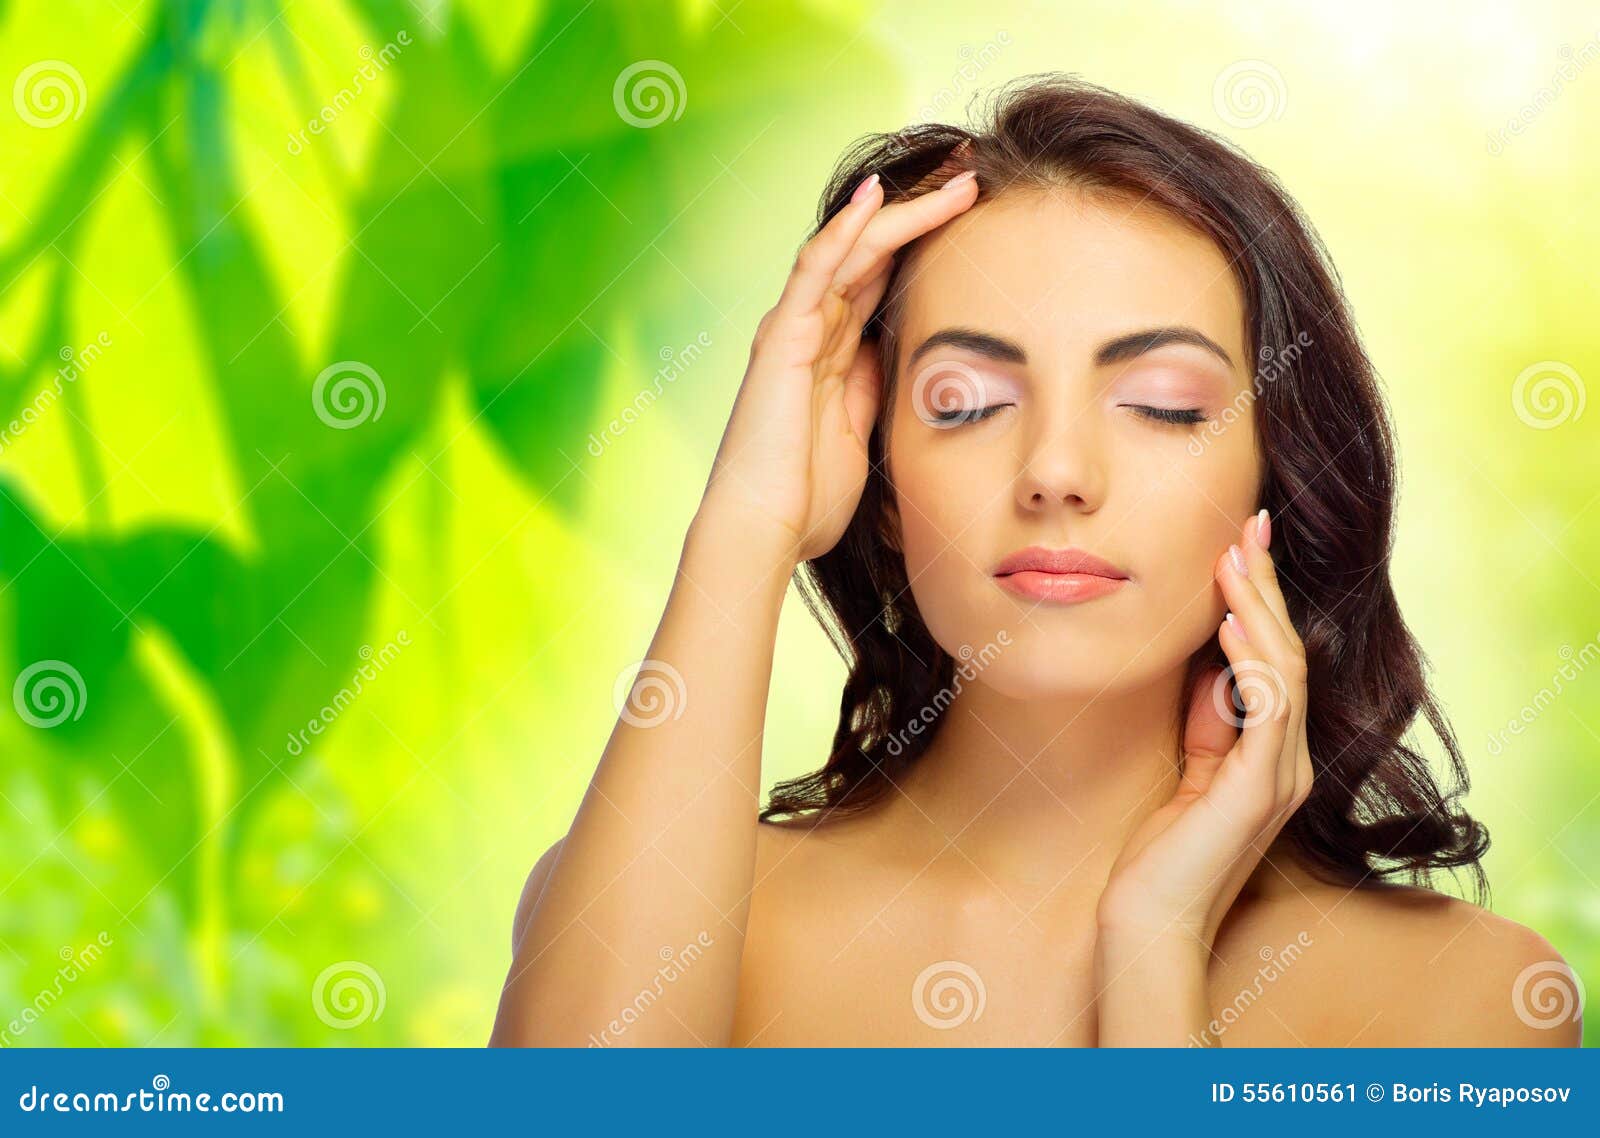 Healthy Girl At Floral Background Stock Photo  Image: 55610561